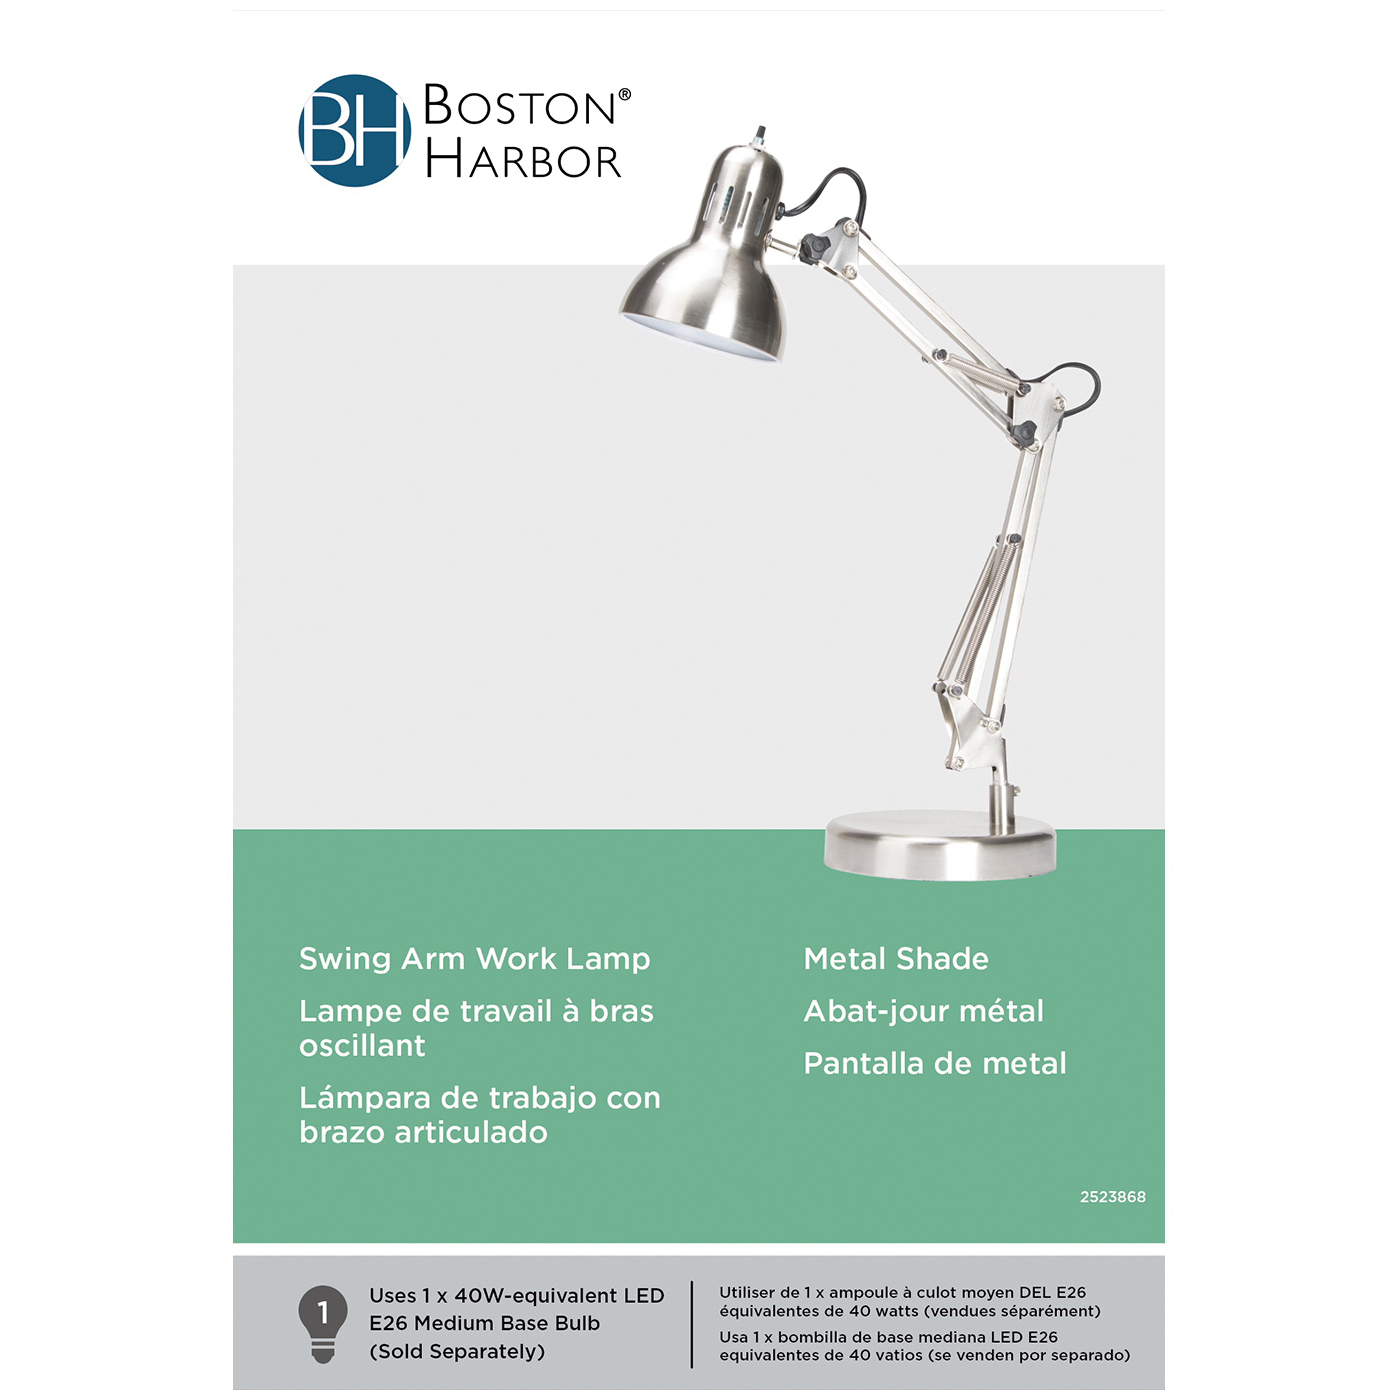 Boston Harbor WK-618E-3L Swing Arm Work Lamp, 120 V, 60 W, 1-Lamp, A19 or CFL Lamp, Brushed Nickel Finish - 2